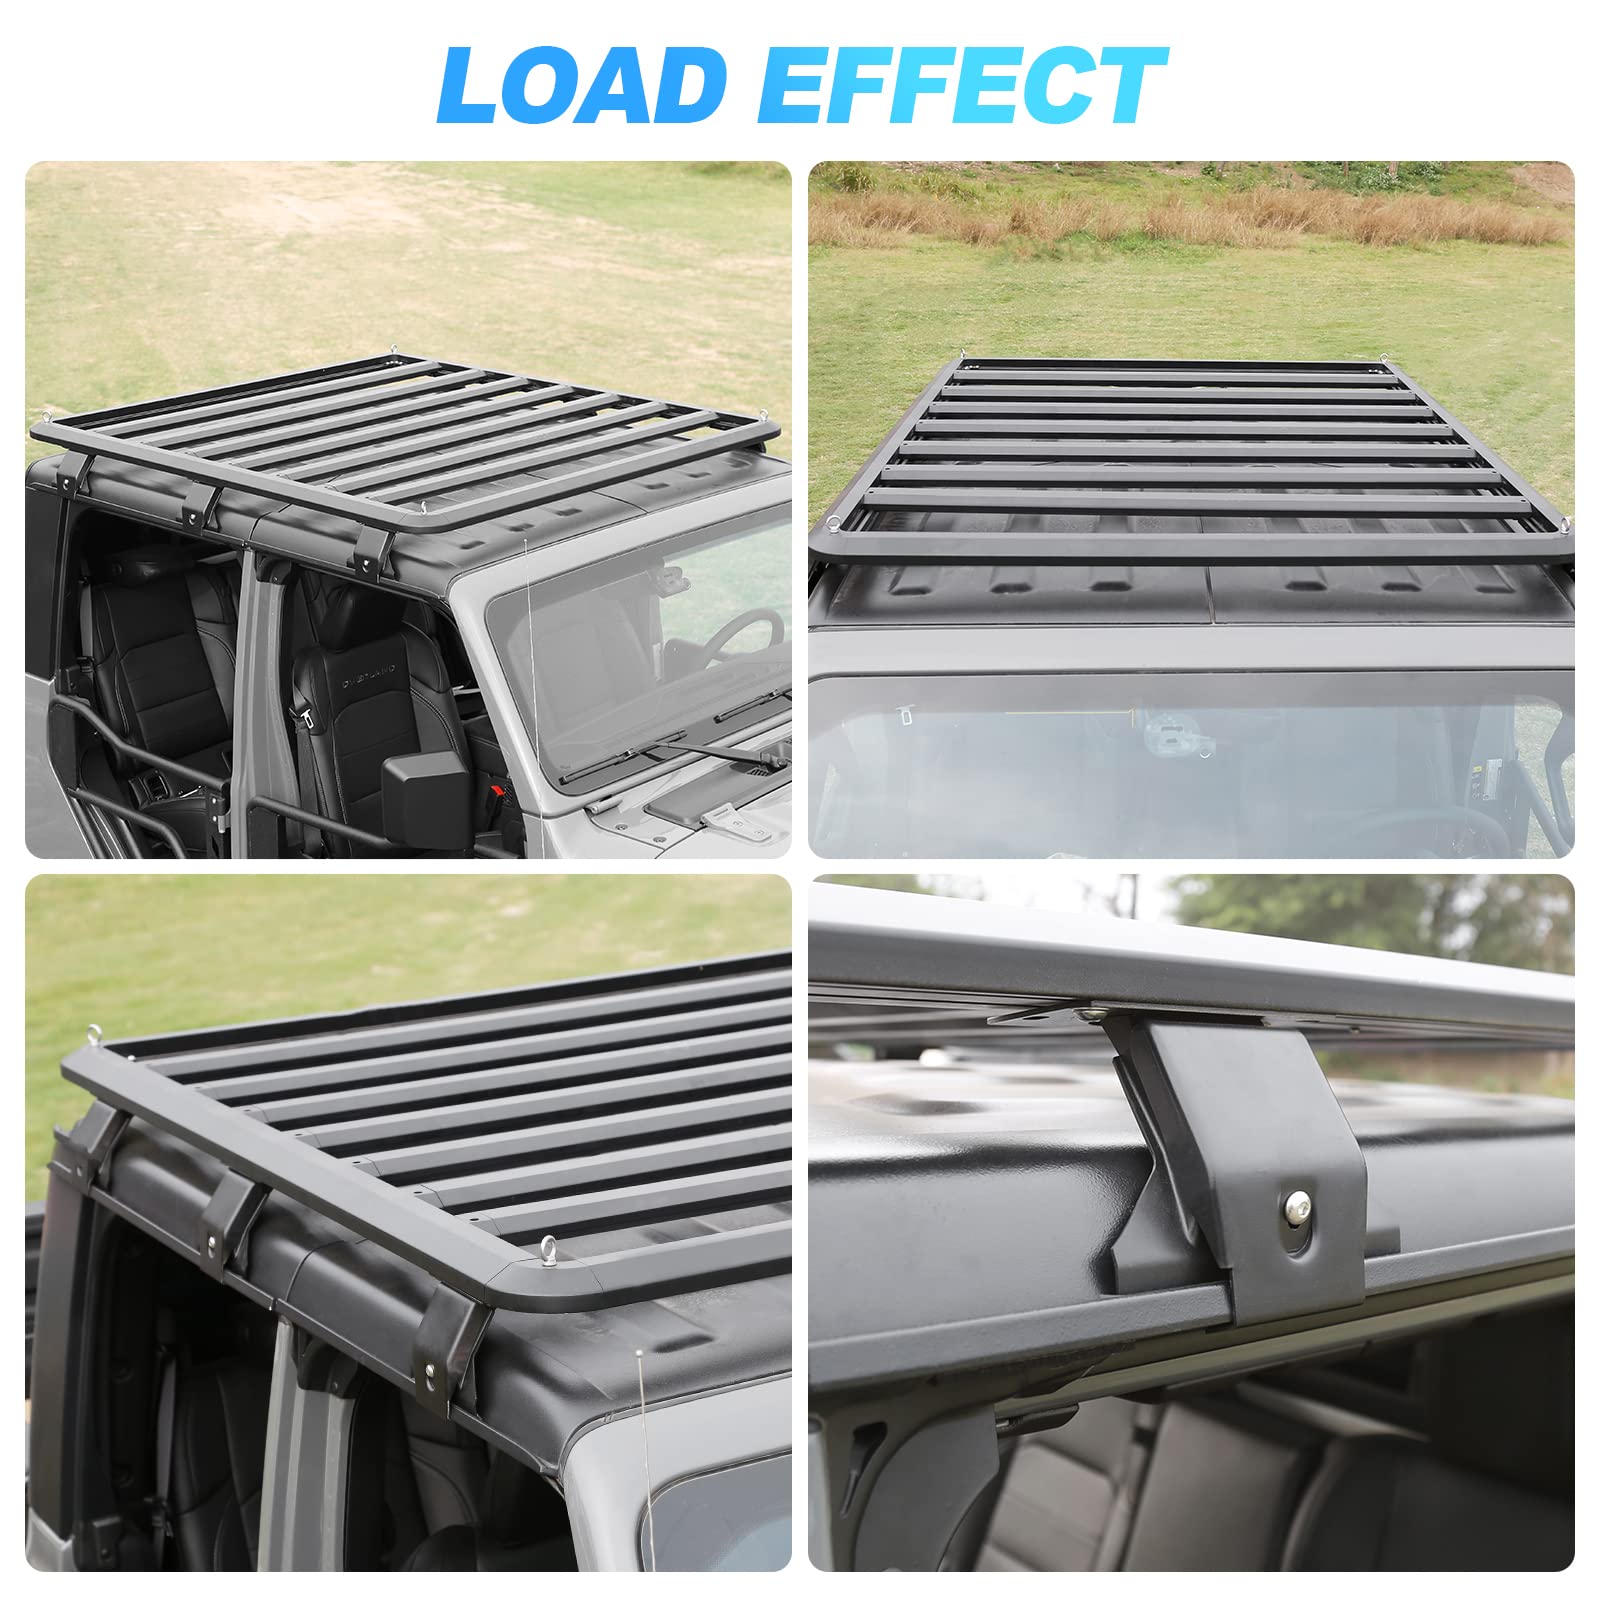 SUPAREE Jeep Accessories SUPAREE Jeep Roof Rack Cargo Carrier 63 x 55 Inch Rooftop Basket for Wrangler Gladiator Product description